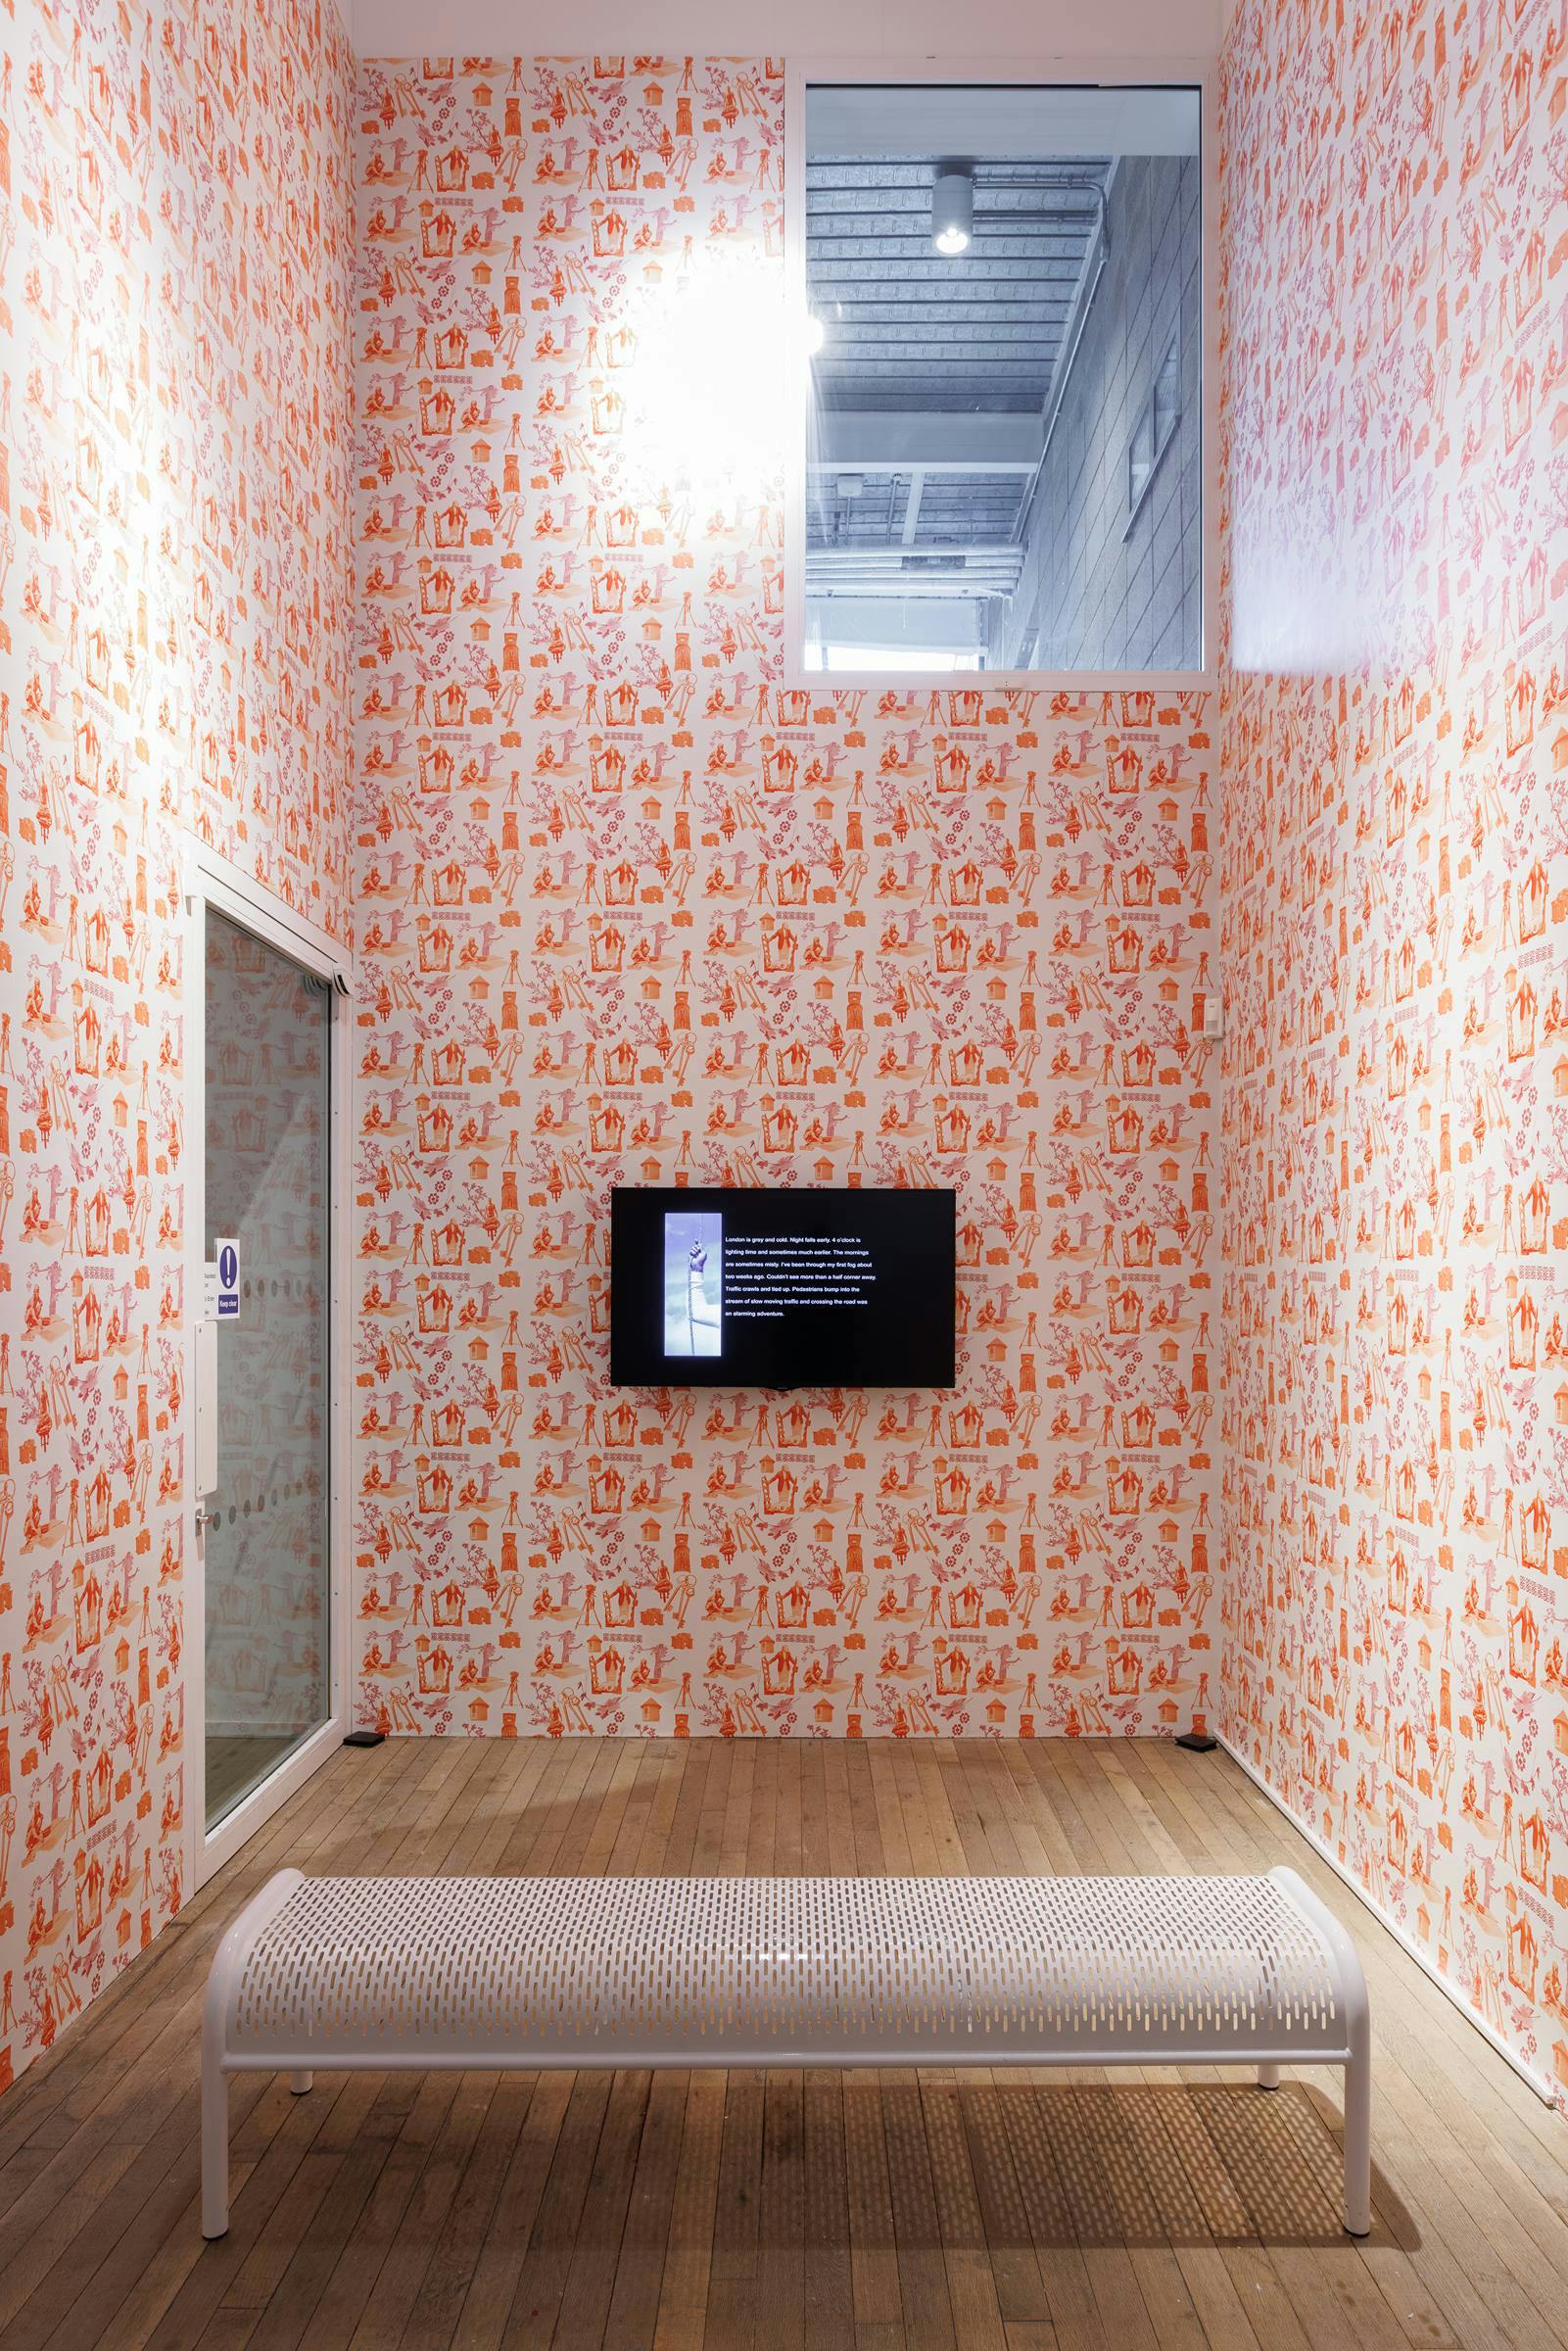 Gallery space with walls covered in orange patterned wallpaper. There is a glass door on the left, a white bench in the centre and a TV mounted on the far wall.